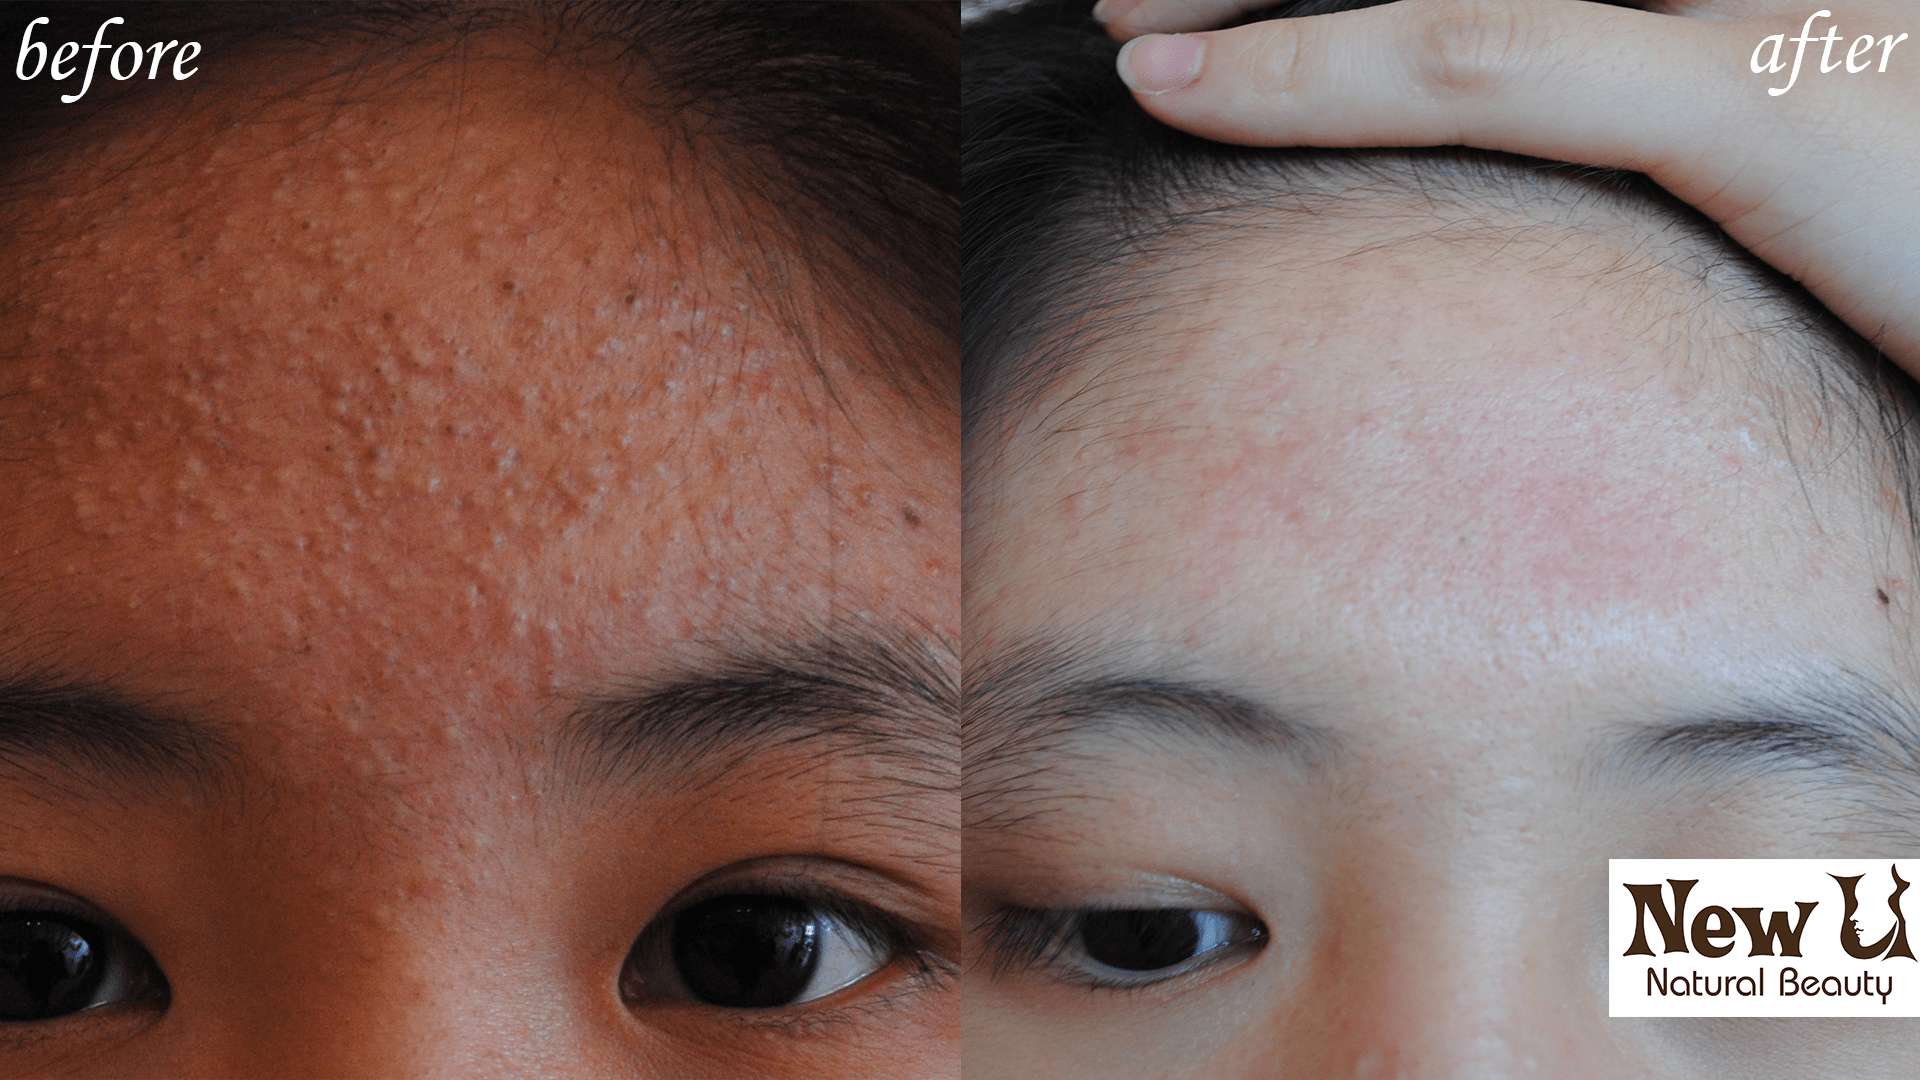 Acne Treatment Scar Removal Las Vegas Before and After